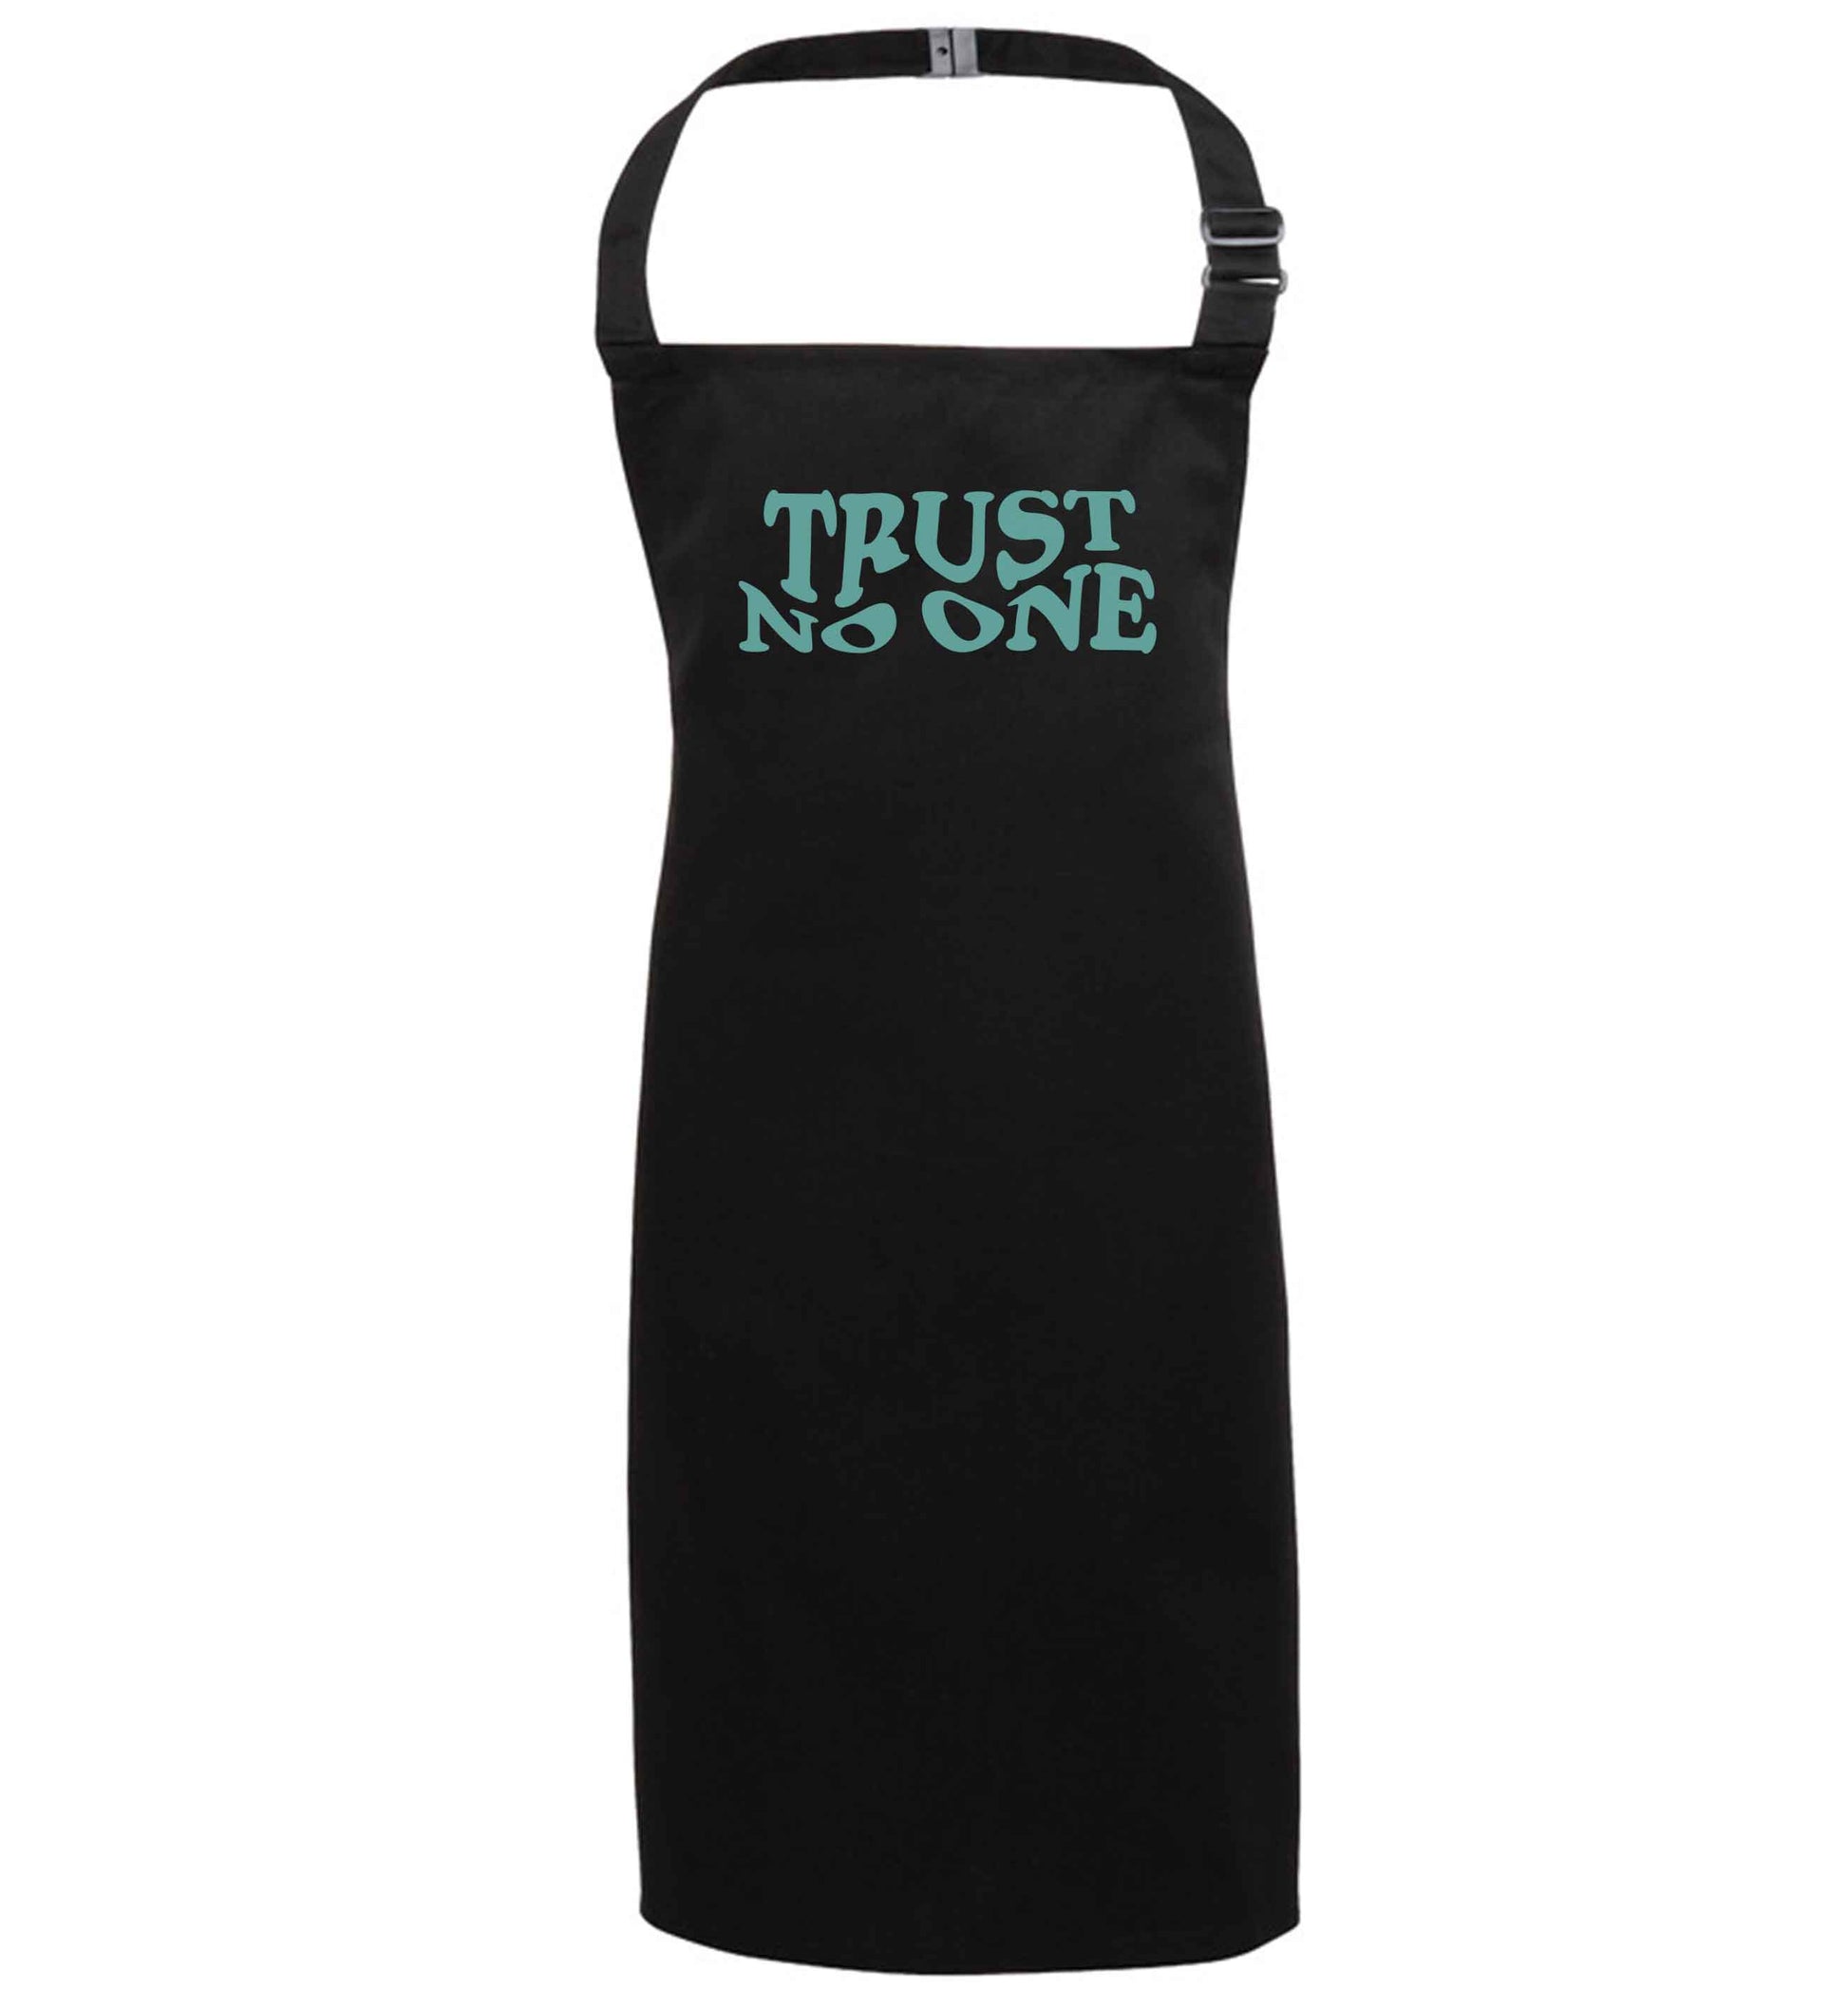 Trust no one black apron 7-10 years